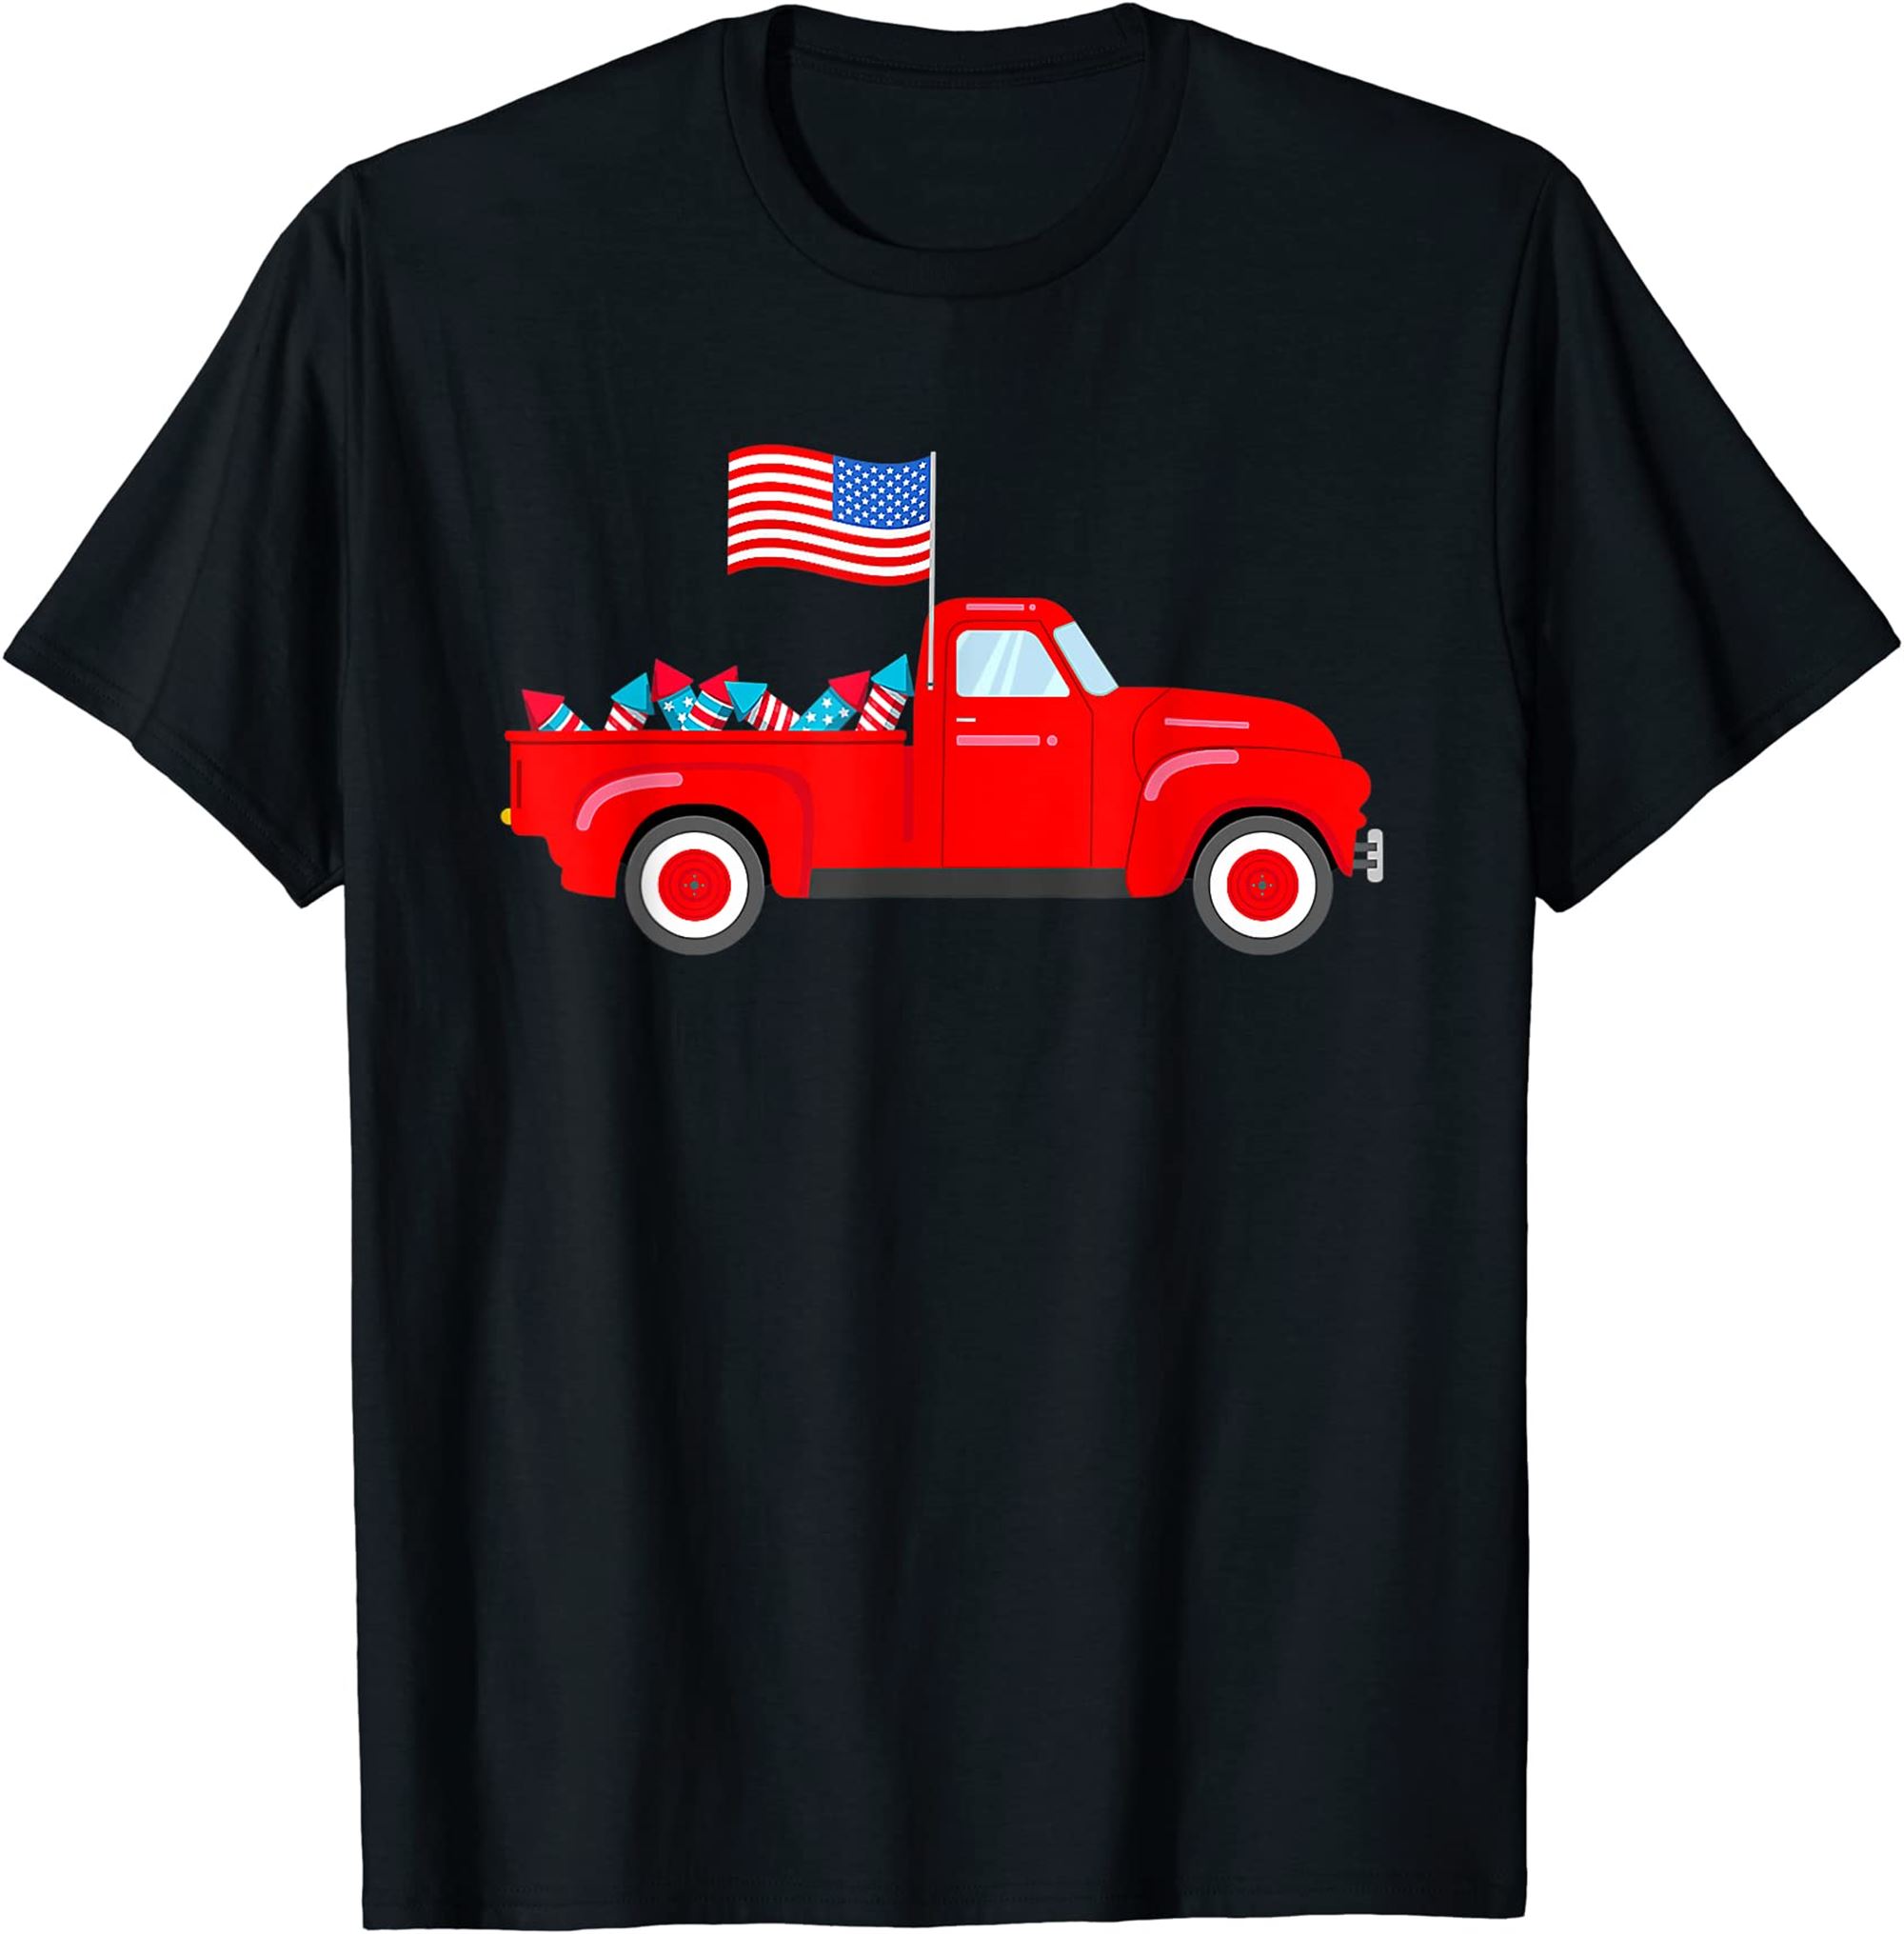 Red Truck 4th Of July American Flag Firework Usa Toddler Boy T-shirt Full Size Up To 5xl